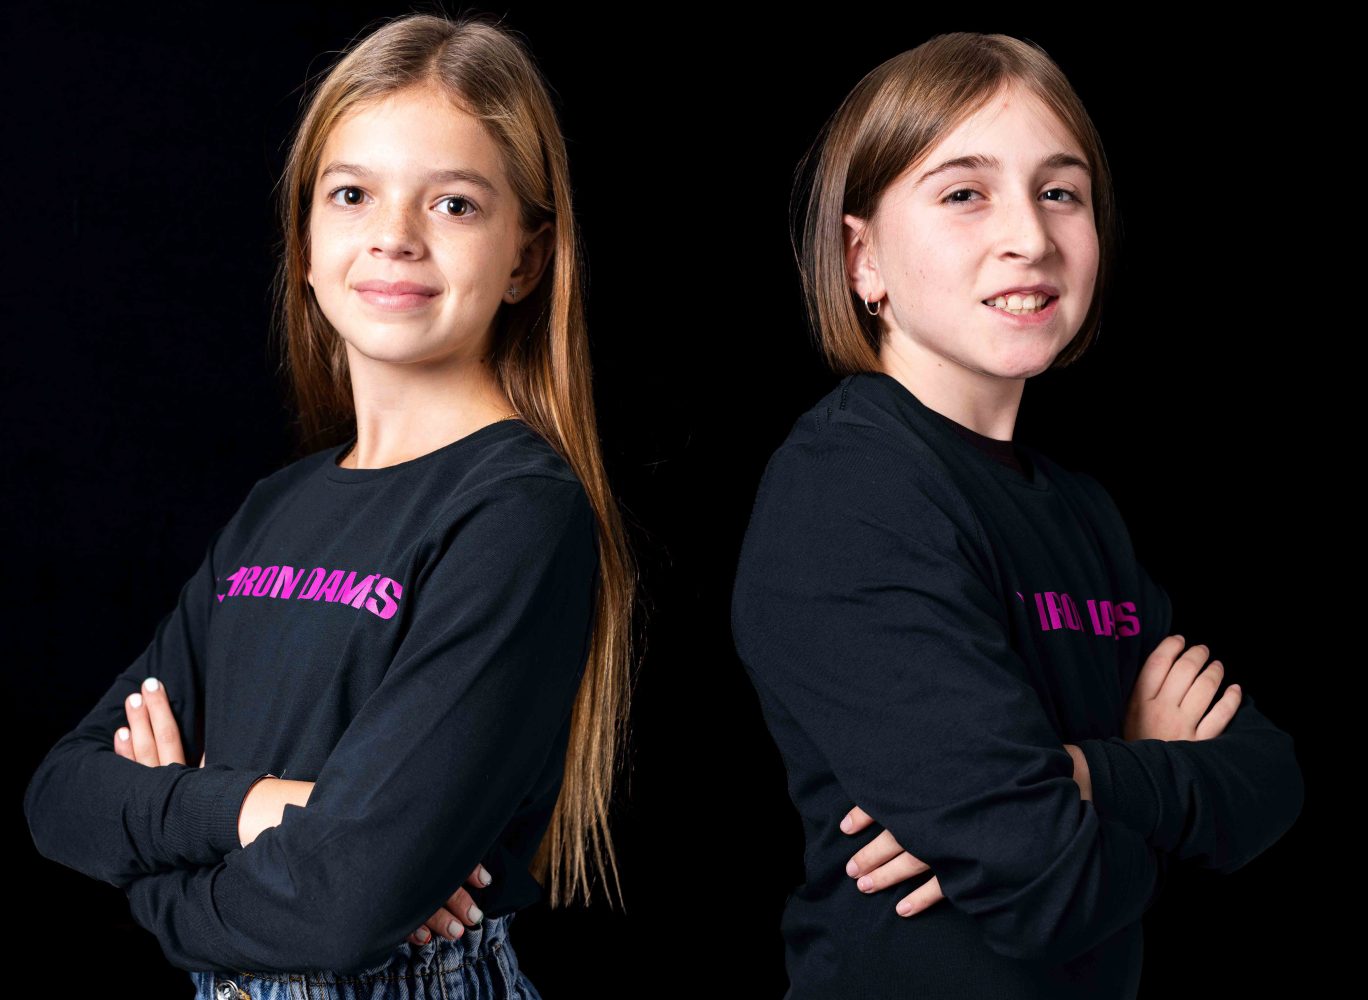 IRON DAMES WELCOMES TWO YOUNG TALENTS, VICKY FARFUS AND MIA OGER, TO ITS RACING FAMILY